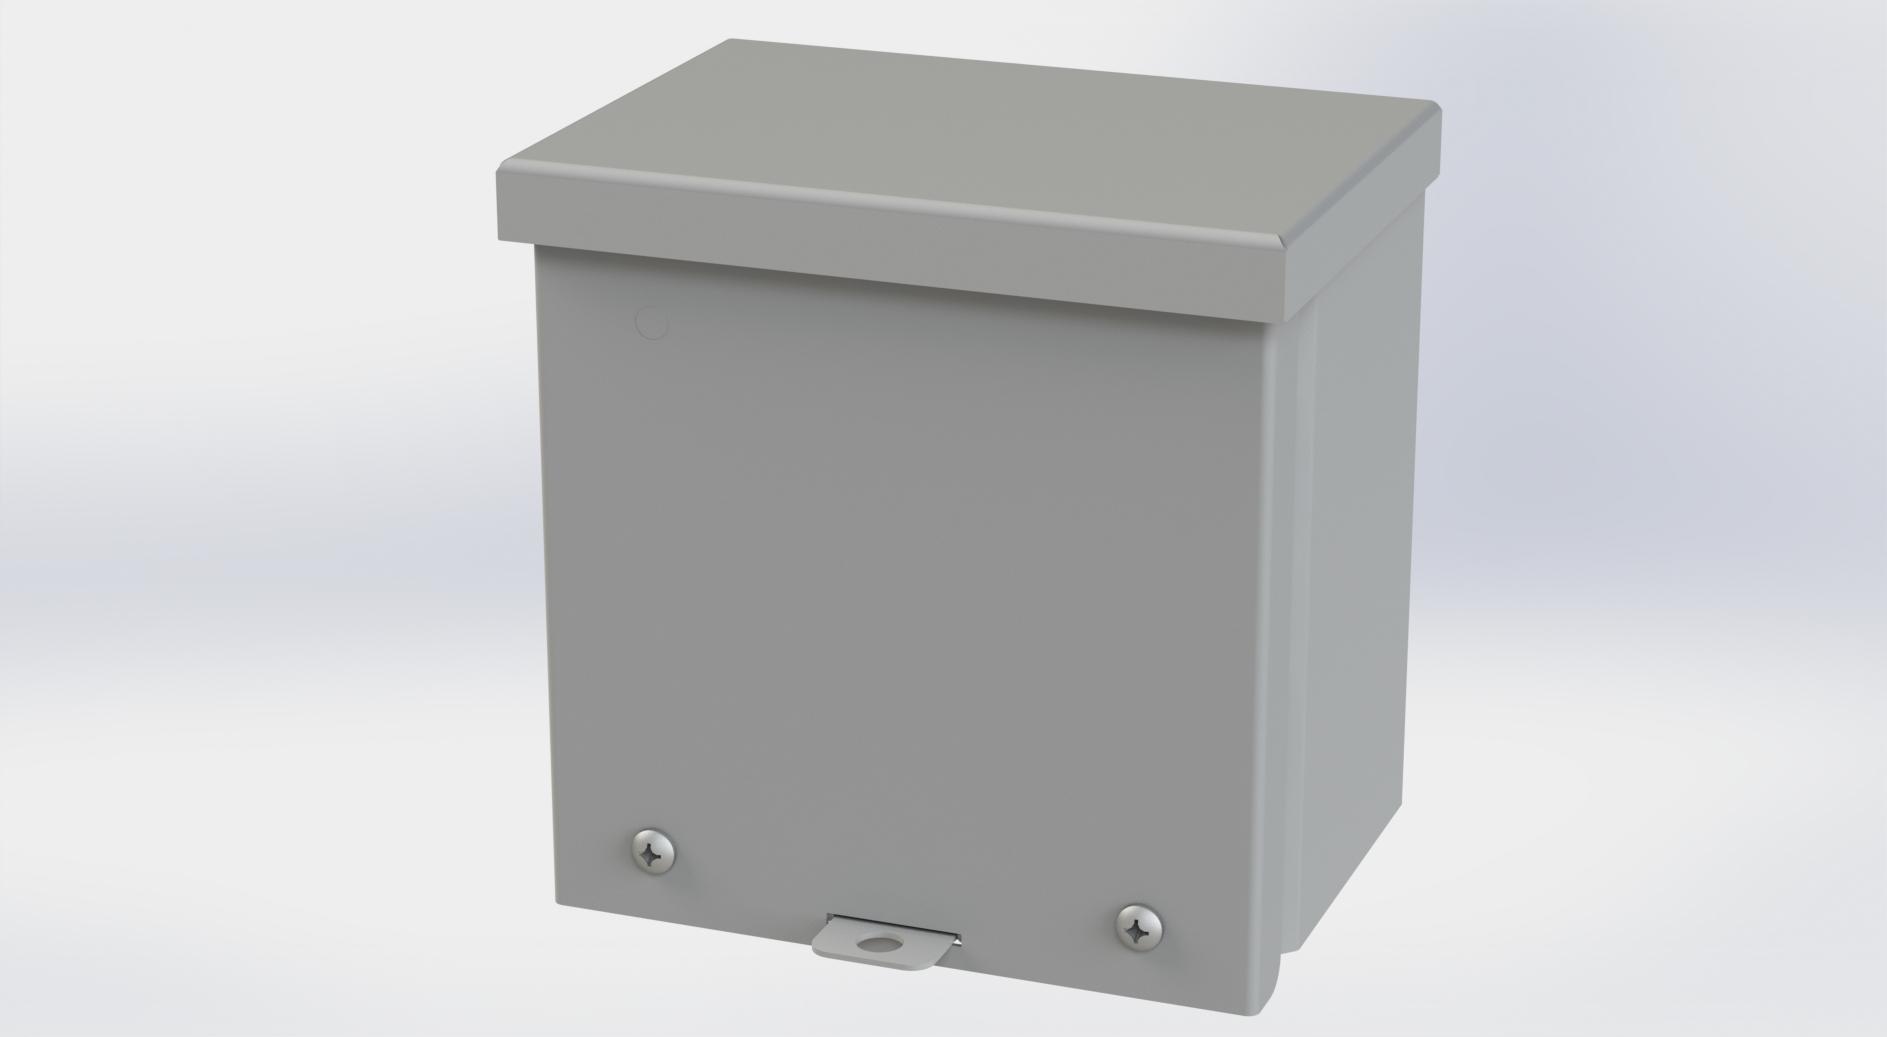 Saginaw Control SCE-6R64 Type-3R Screw Cover Enclosure, Height:6.00", Width:6.00", Depth:4.00", ANSI-61 gray powder coating inside and out.